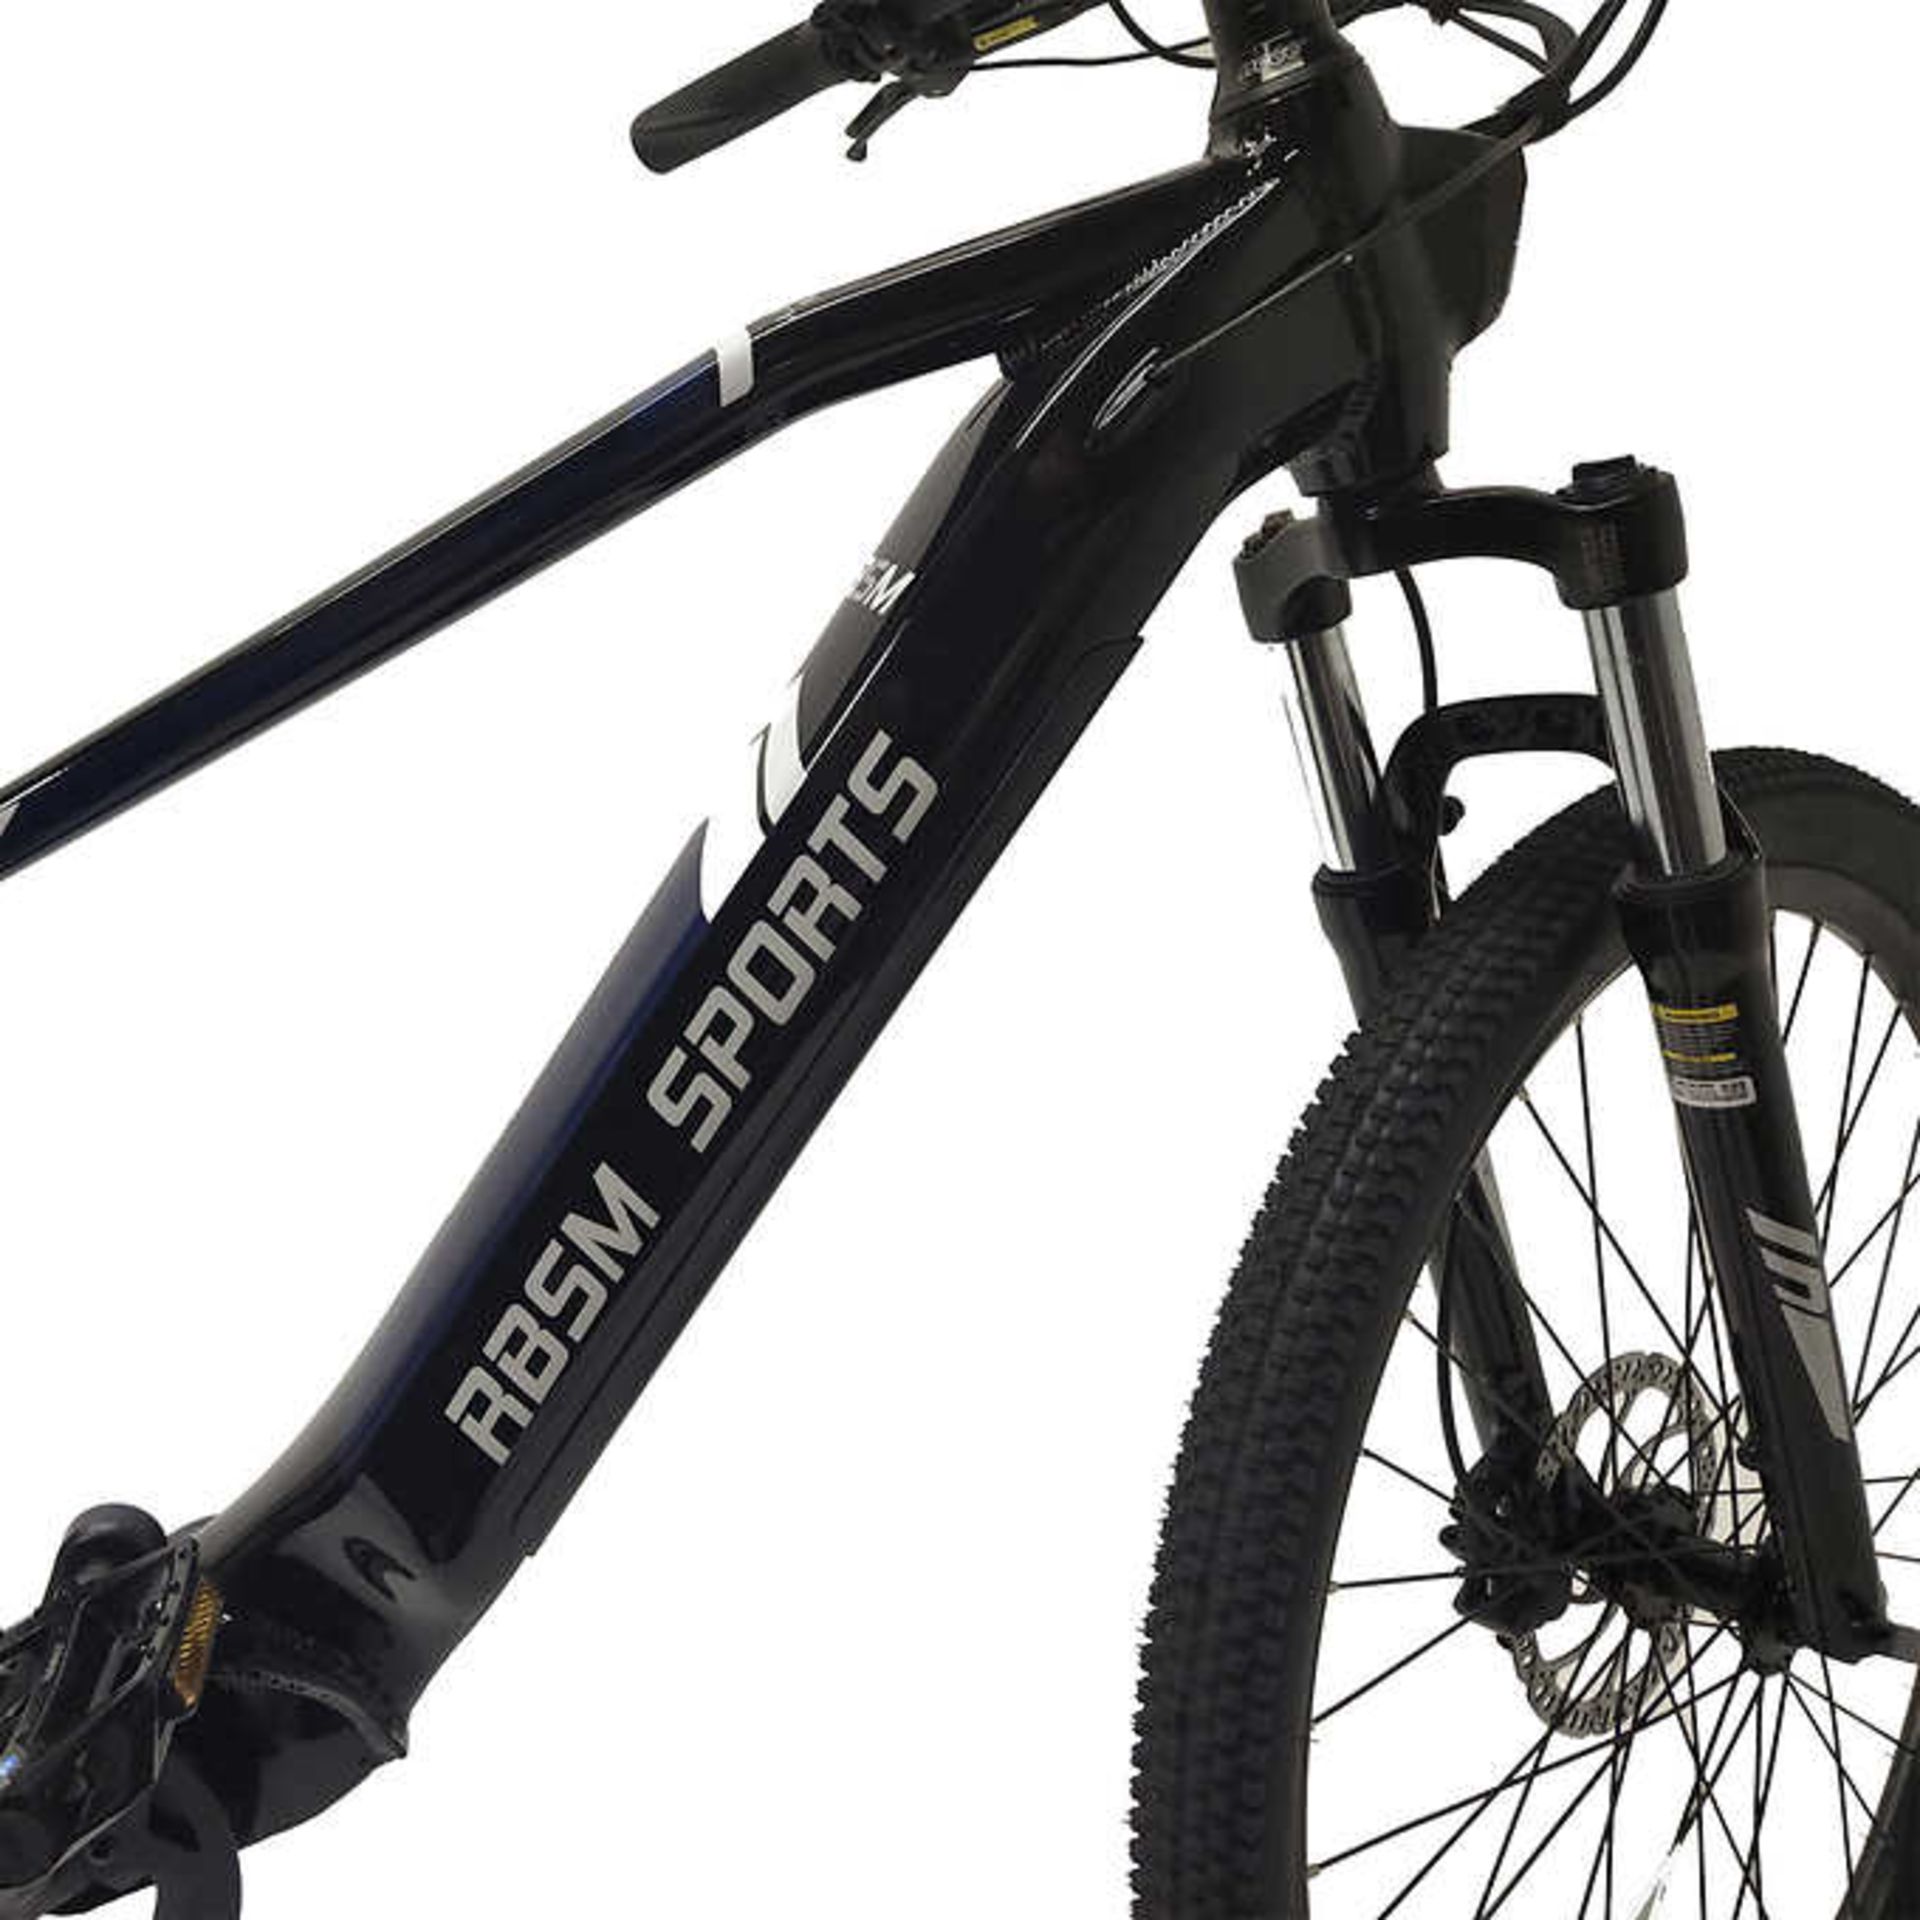 SPORTS MUD ADDER 2.1 TOUGH & RUGGED ELECTRIC MOUNTAIN BIKE (MSRP $2,700) - Image 6 of 6